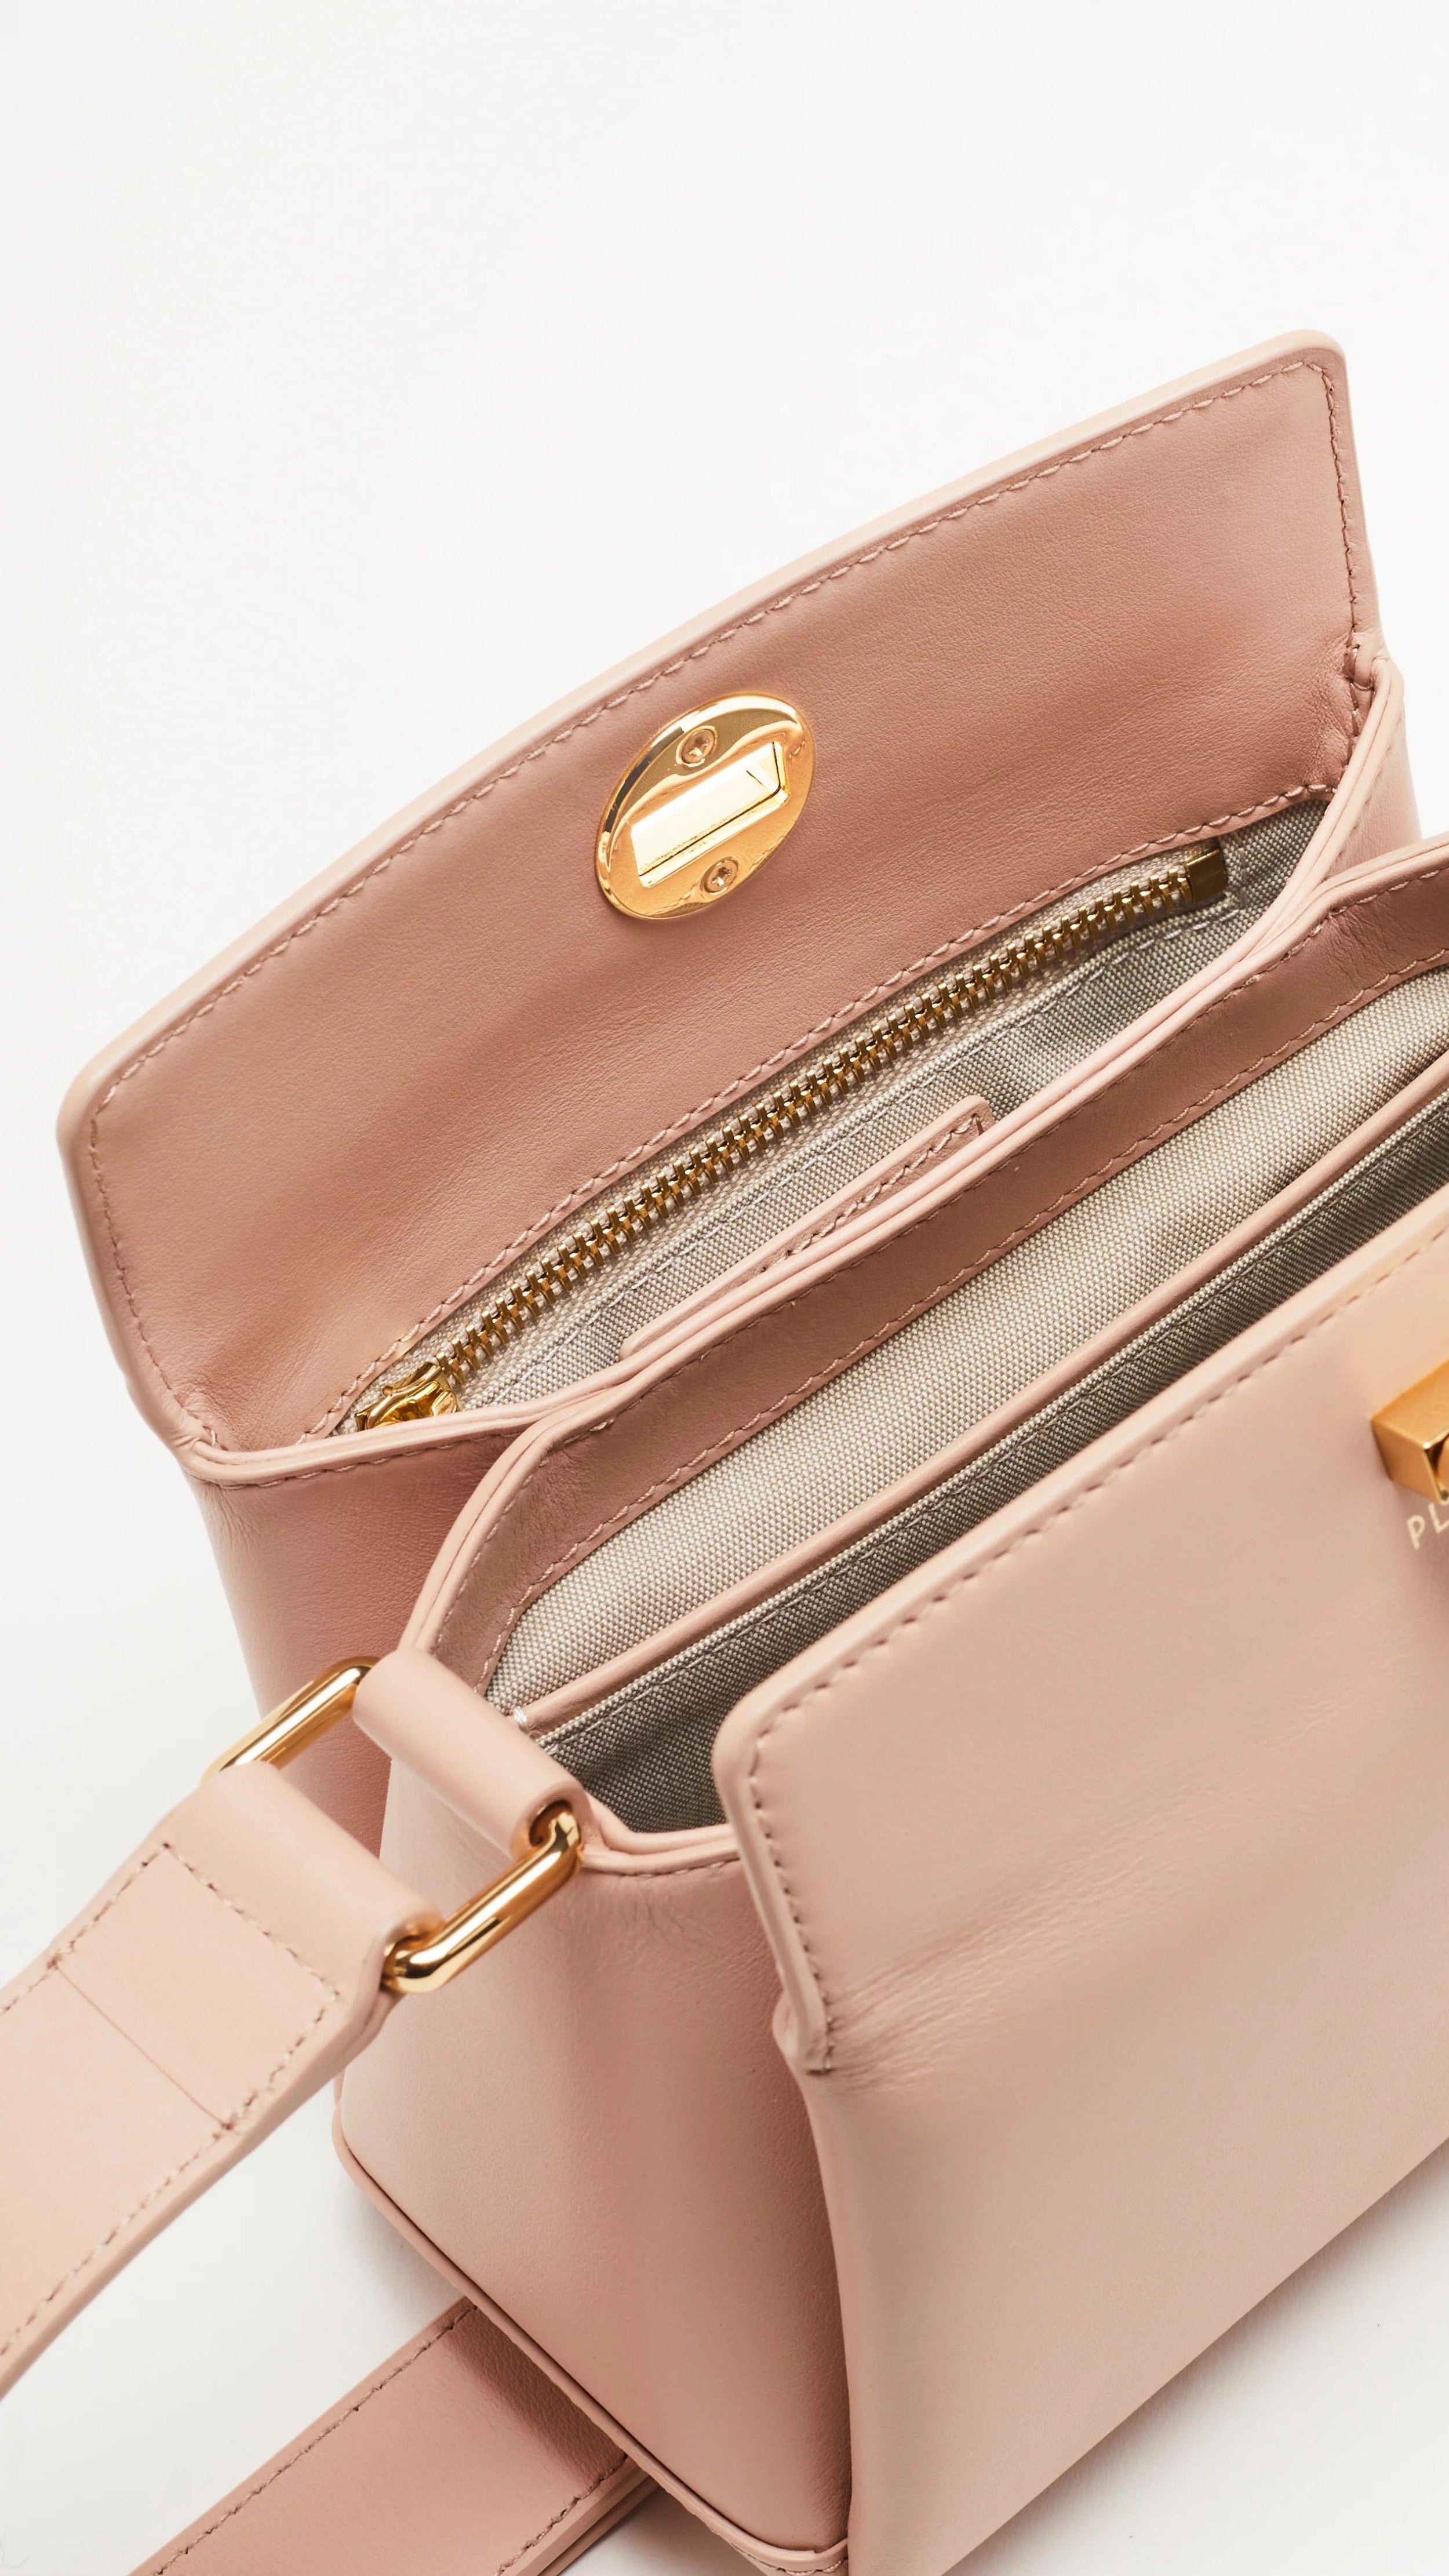 Plan C The Mini Folded Bag in Sand Pink. Luxury handbag crafted in Italy from soft calfskin with an adjustable leather shoulder strap. This purse has a gold-toned turnstile top closure and offers three compartments, one flat zipped and one snap buttoned pocket. Photo shows the interior detail.